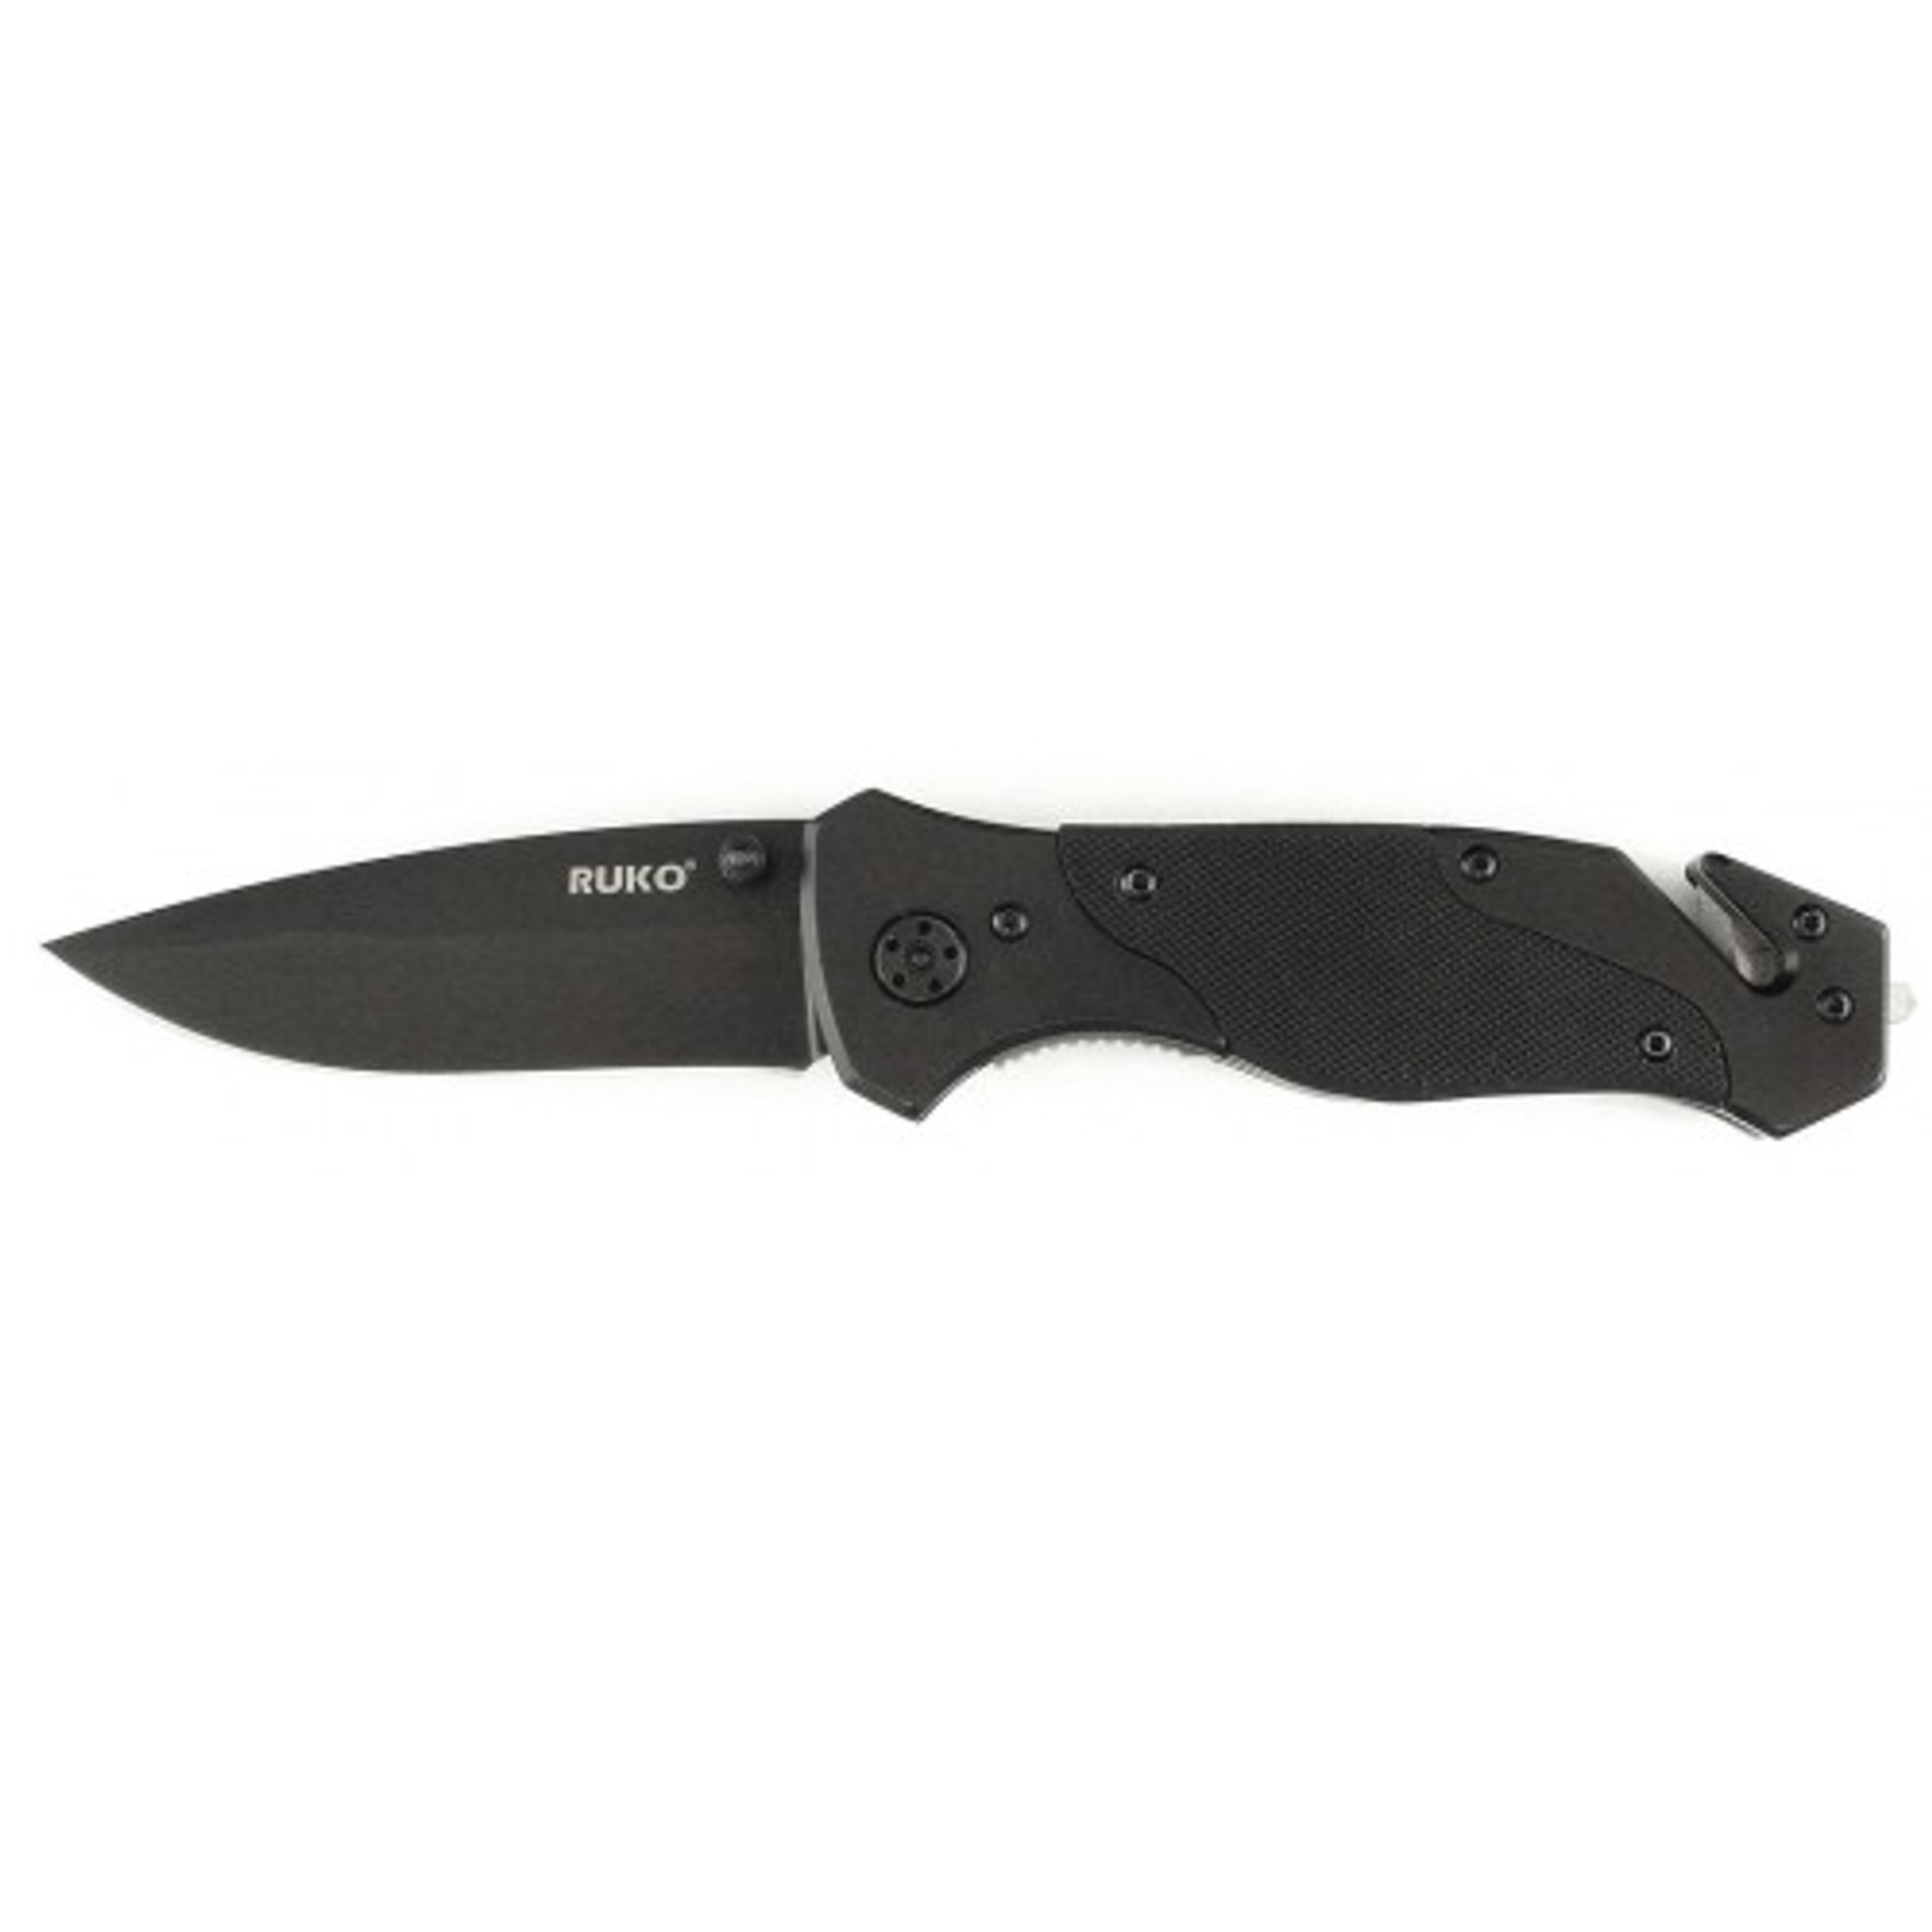 RUKO RUK0120, 440A, 3-3/8" Folding Blade Tactical Knife, G10/Stainless Steel Handle